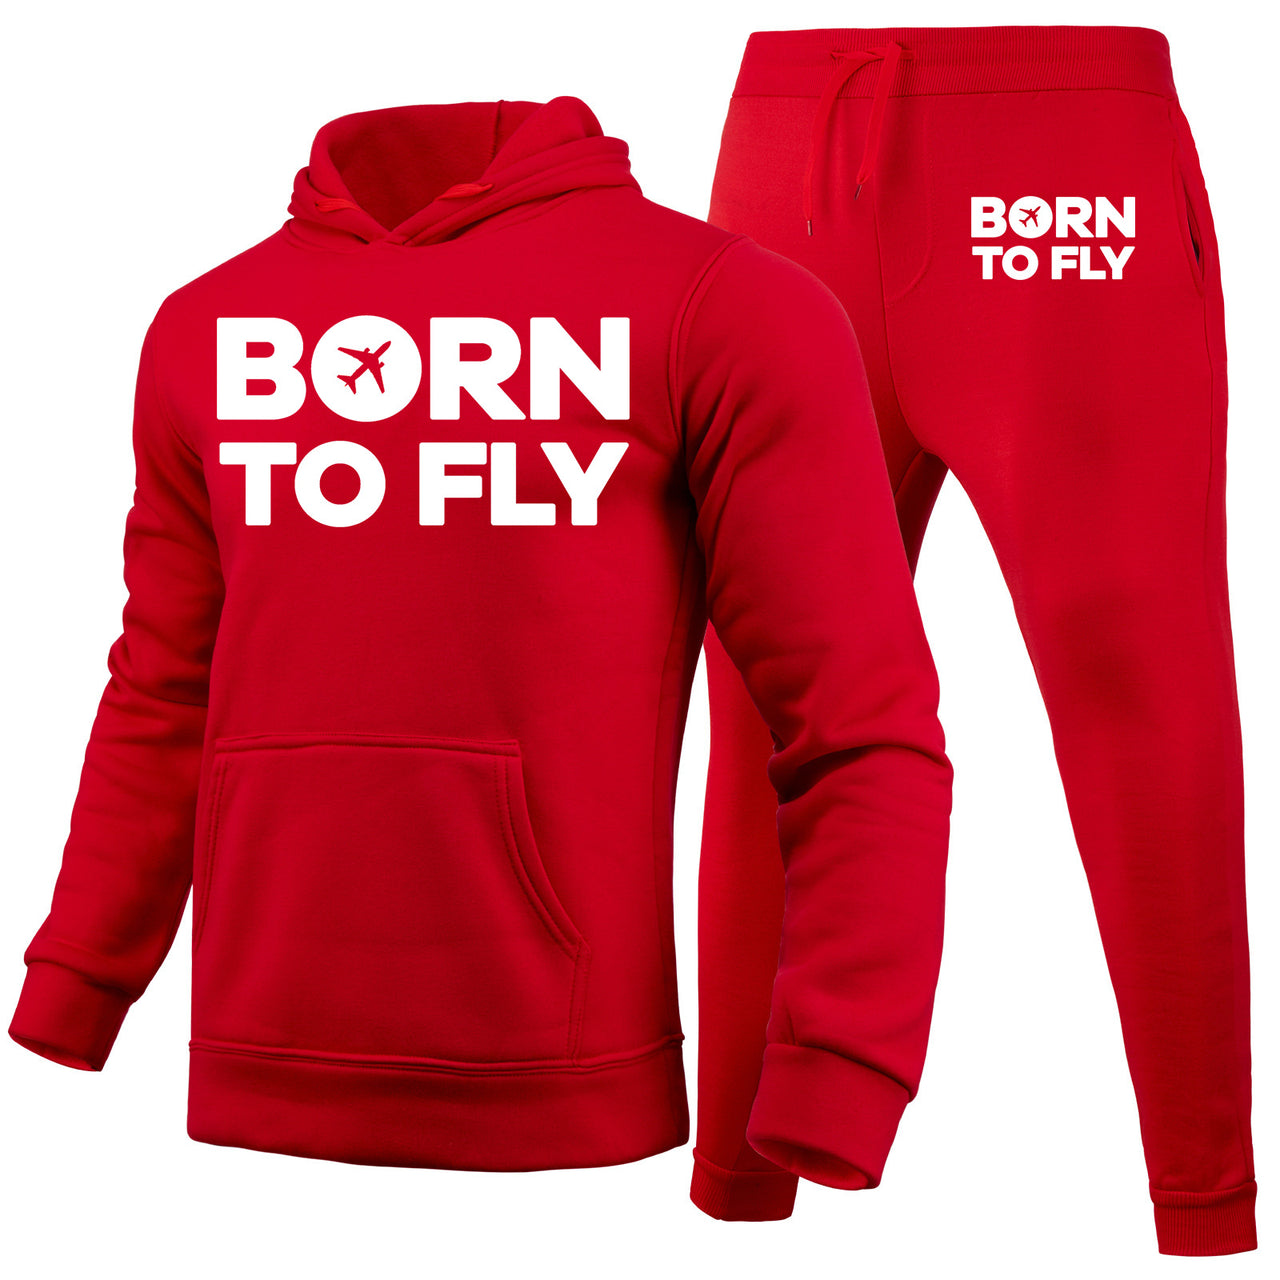 Born To Fly Special Designed Hoodies & Sweatpants Set